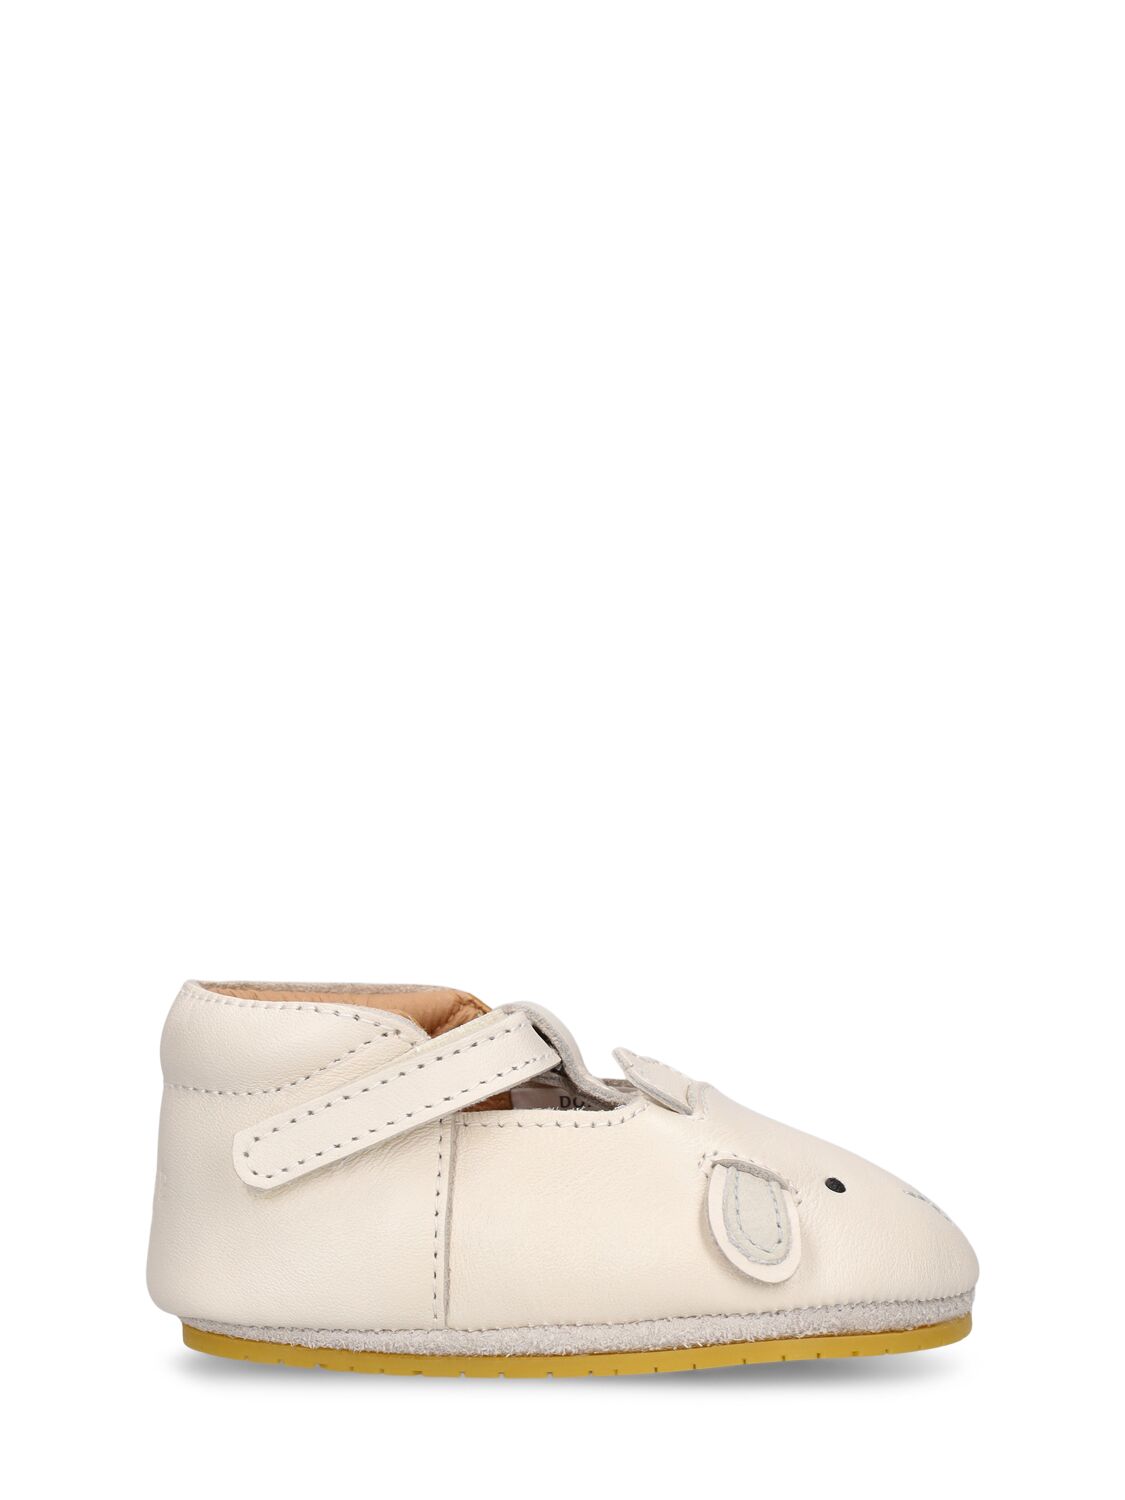 Image of Lammy Leather Pre-walker Shoes